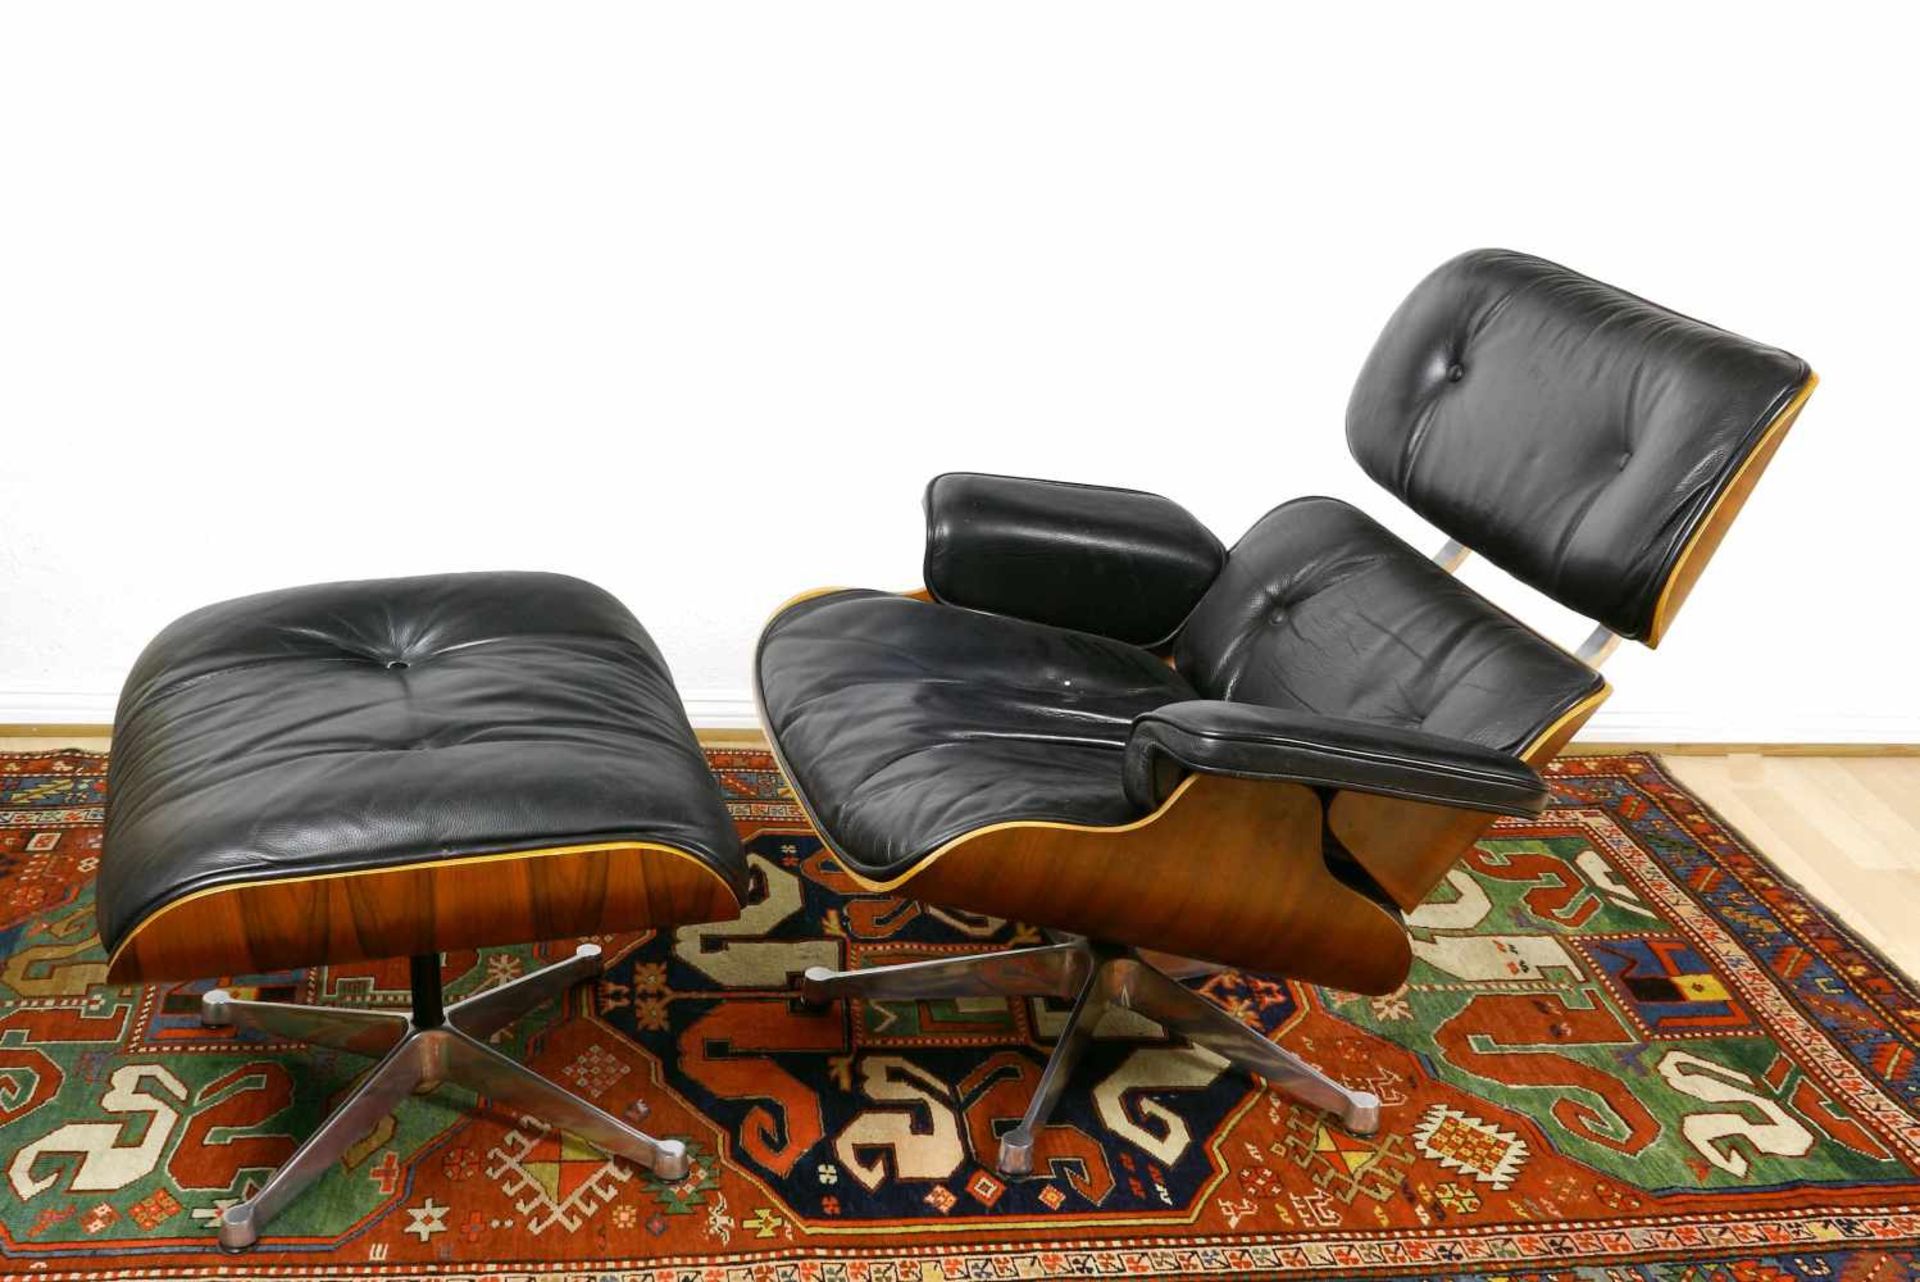 Eames Long Chair und Ottoman, 2. Hälfte 20. Jh., zwei Teile Entwurf Charles und Ray Eames 1956.